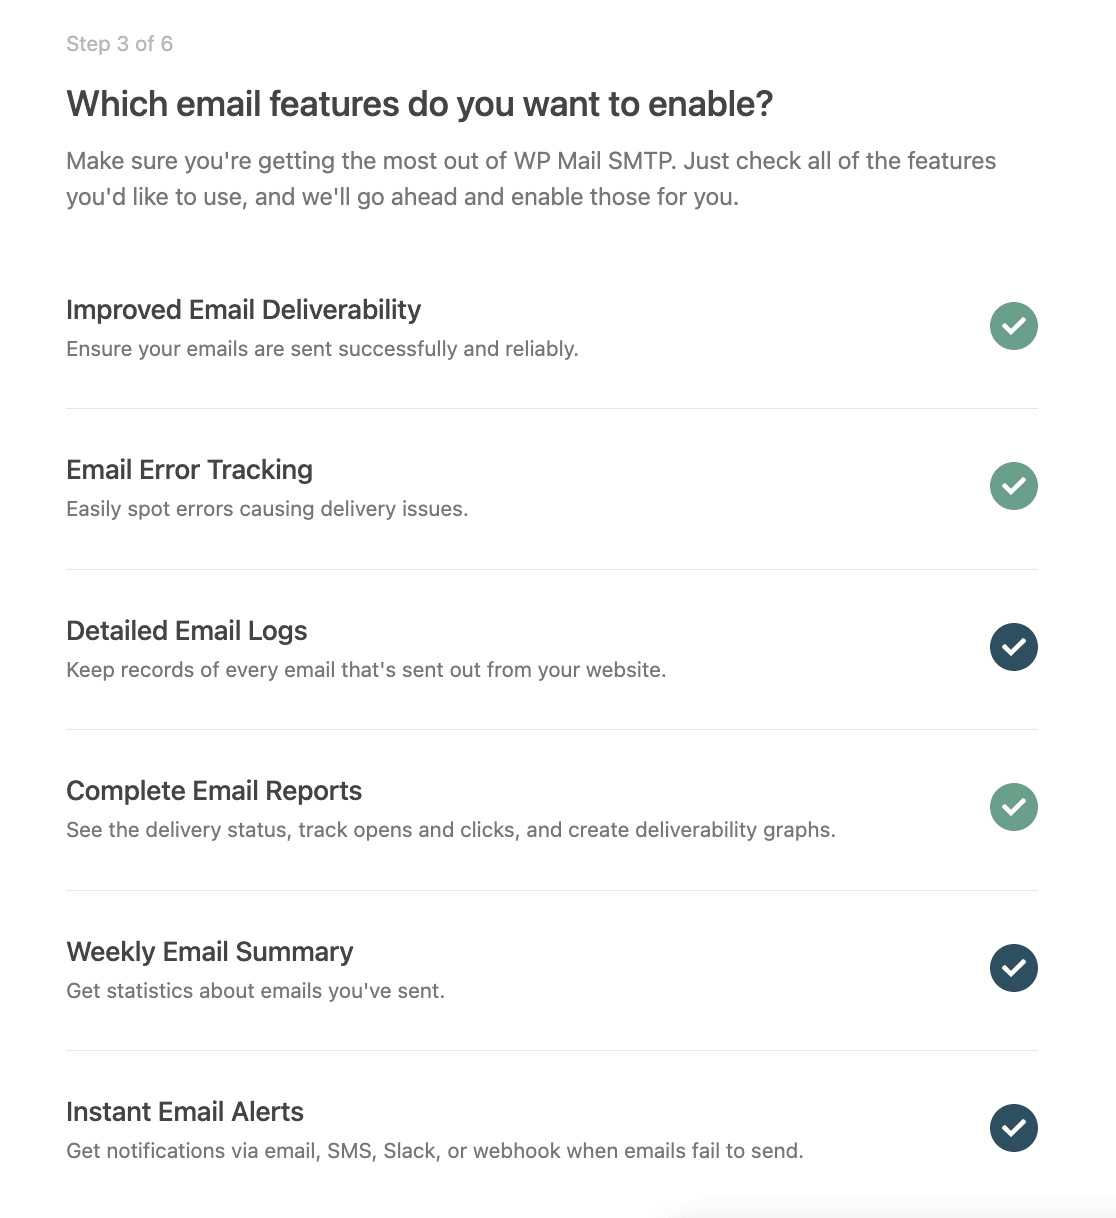 Select which email features you want to enable